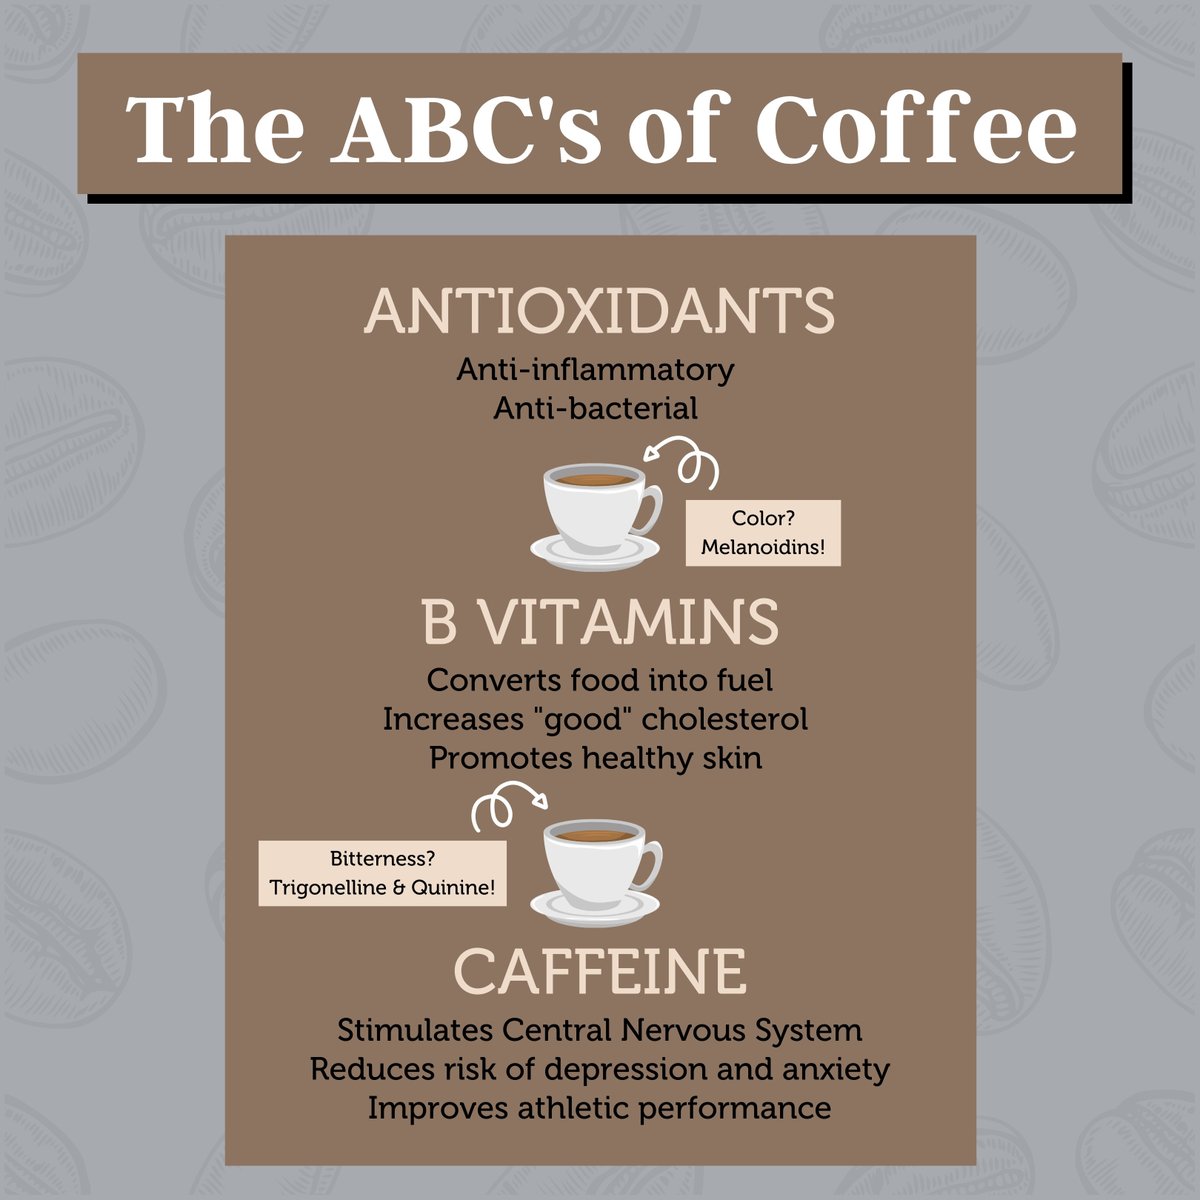 Happy Wednesday! In honor of National Nutrition Month, we are launching a mini-series on the health benefits of our products. We are kickin' it off with, of course, COFFEE!